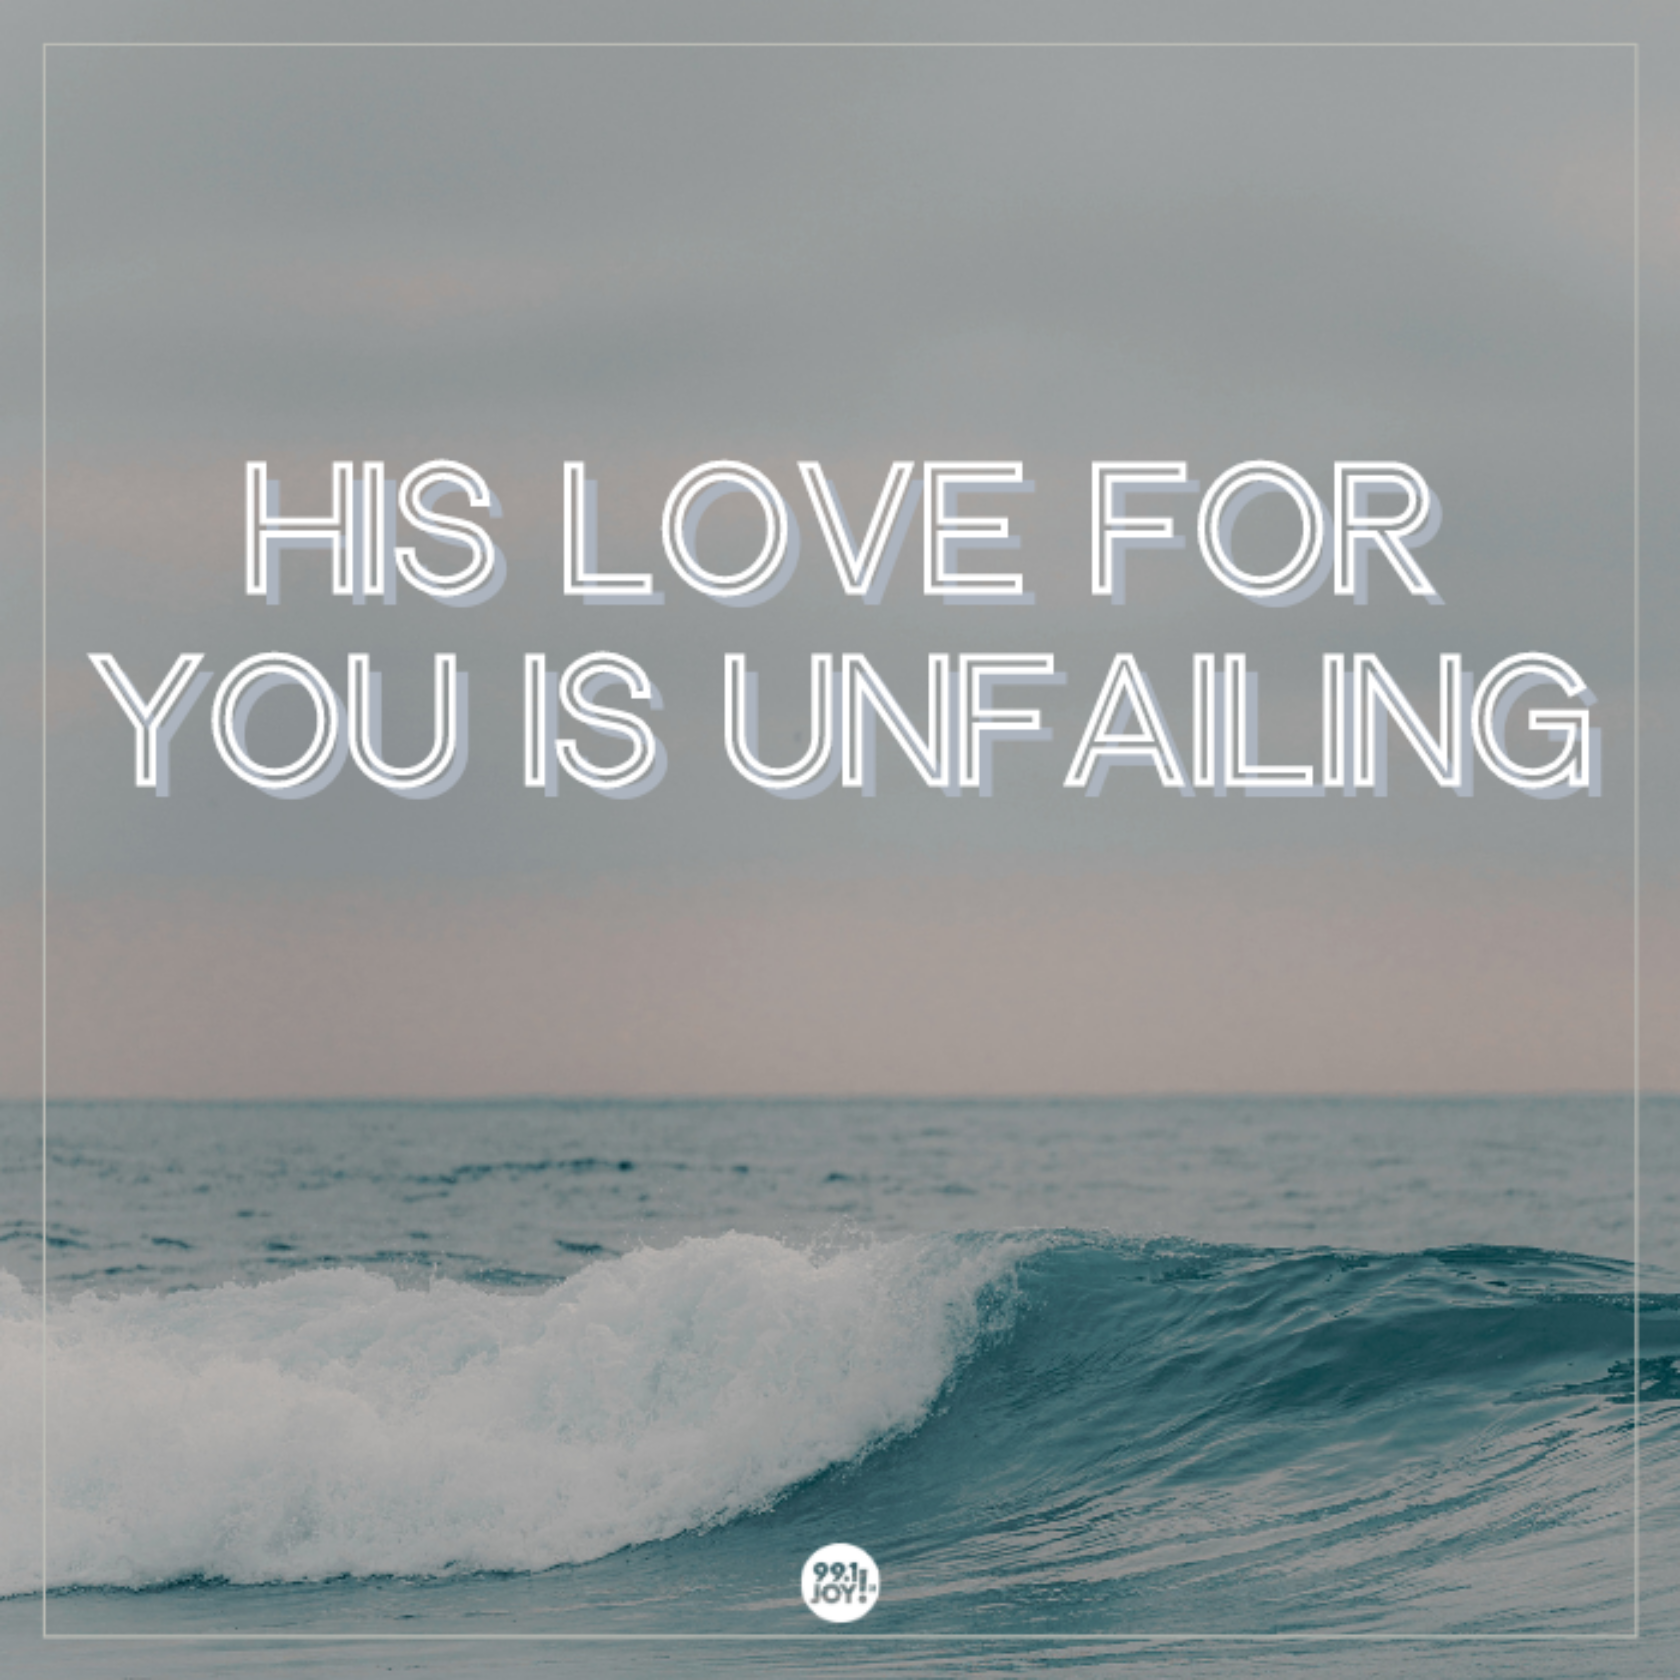 His Love For You Is Unfailing